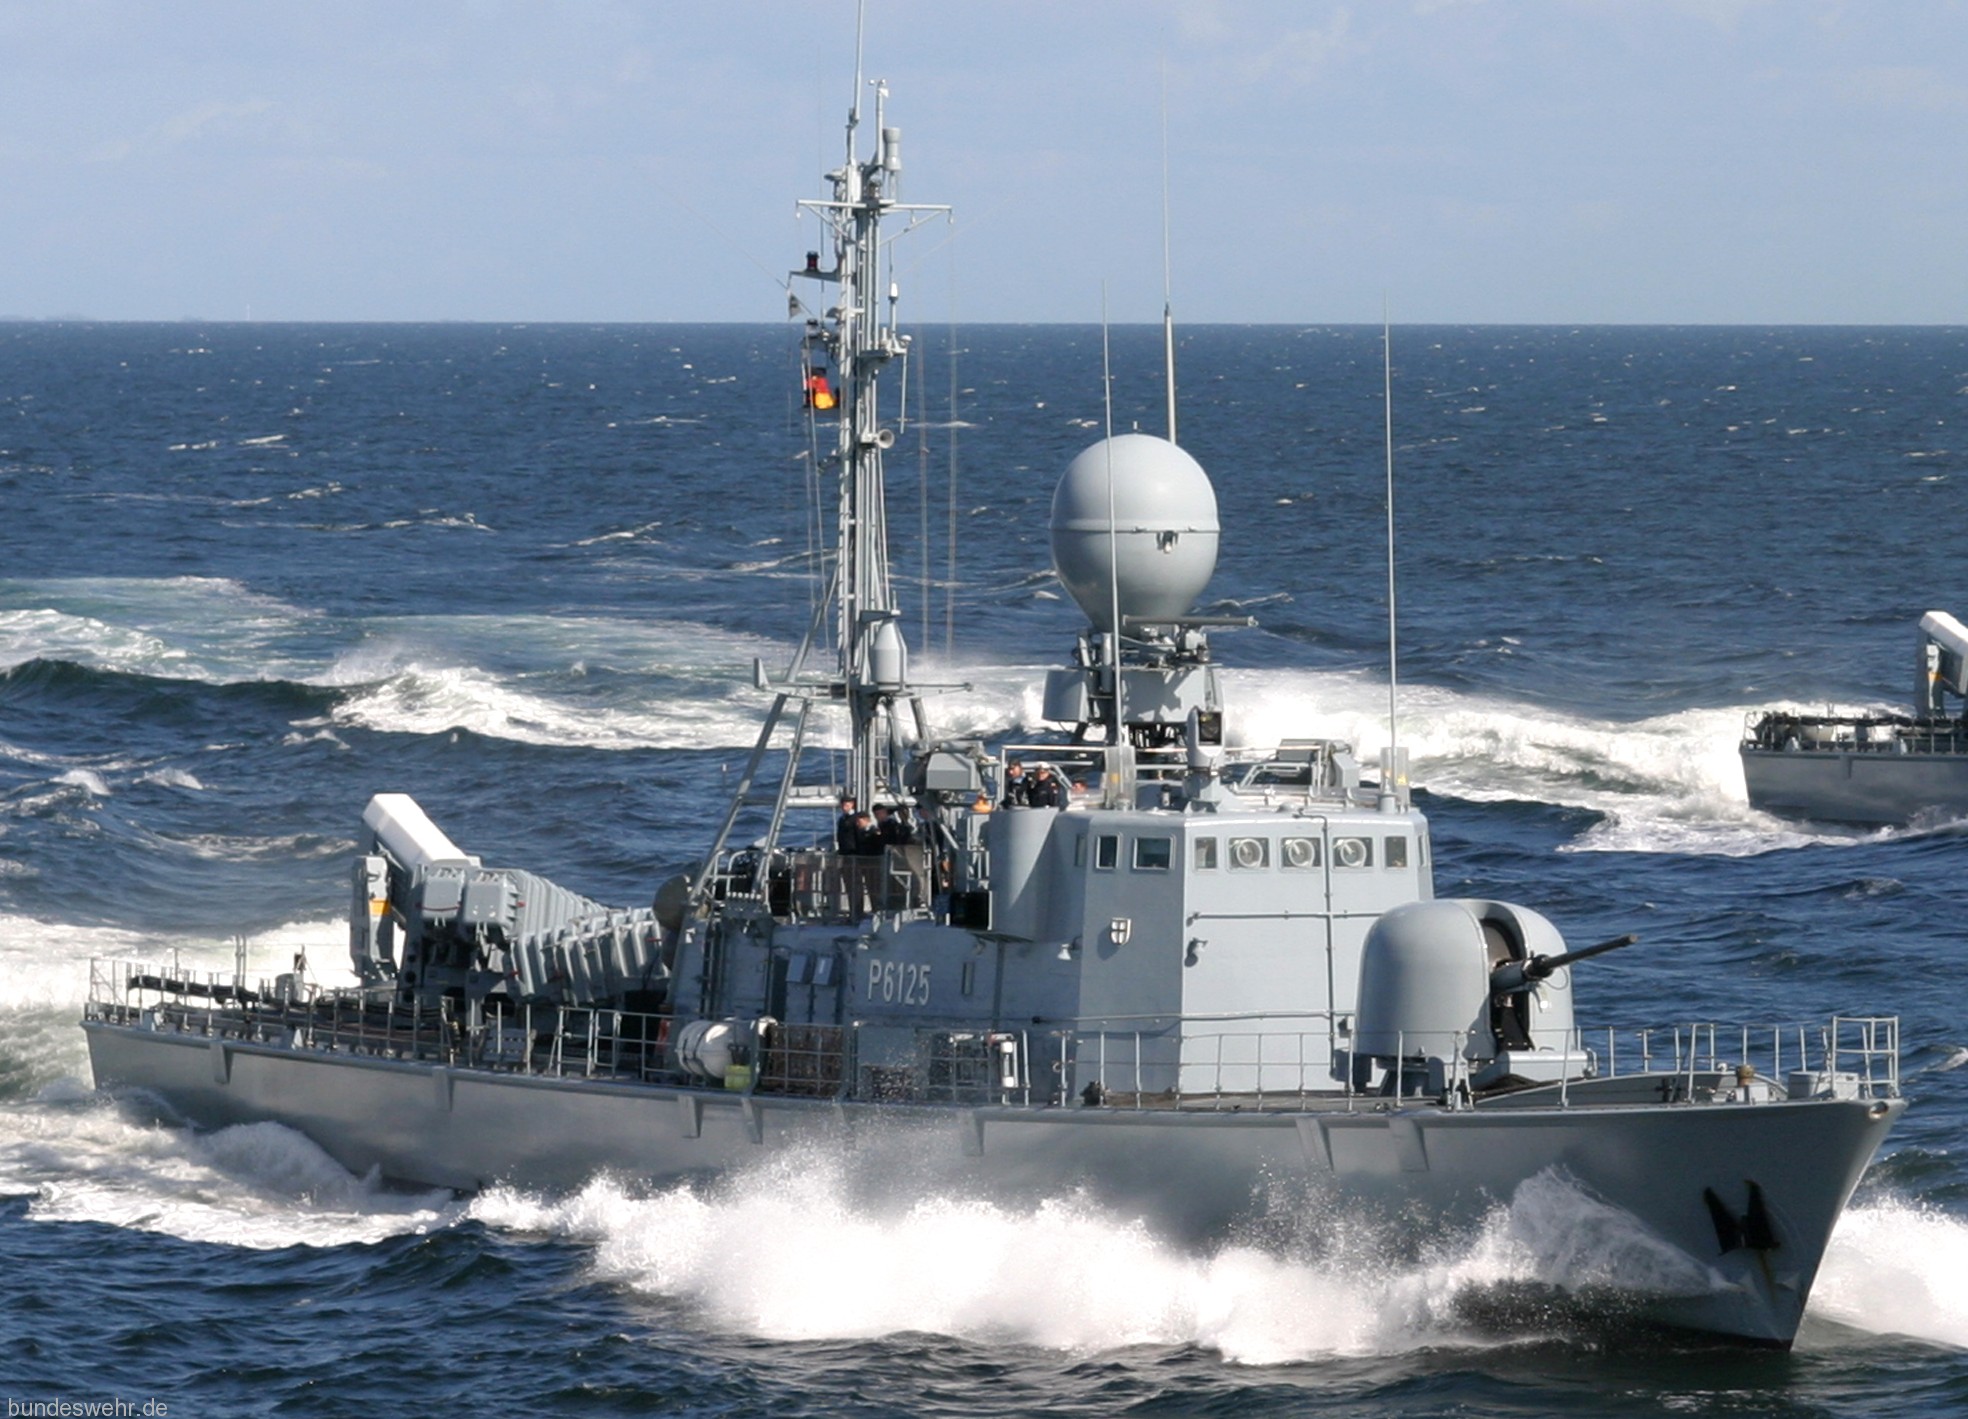 p6125 s75 fgs zobel type 143a gepard class fast attack missile craft german navy 04